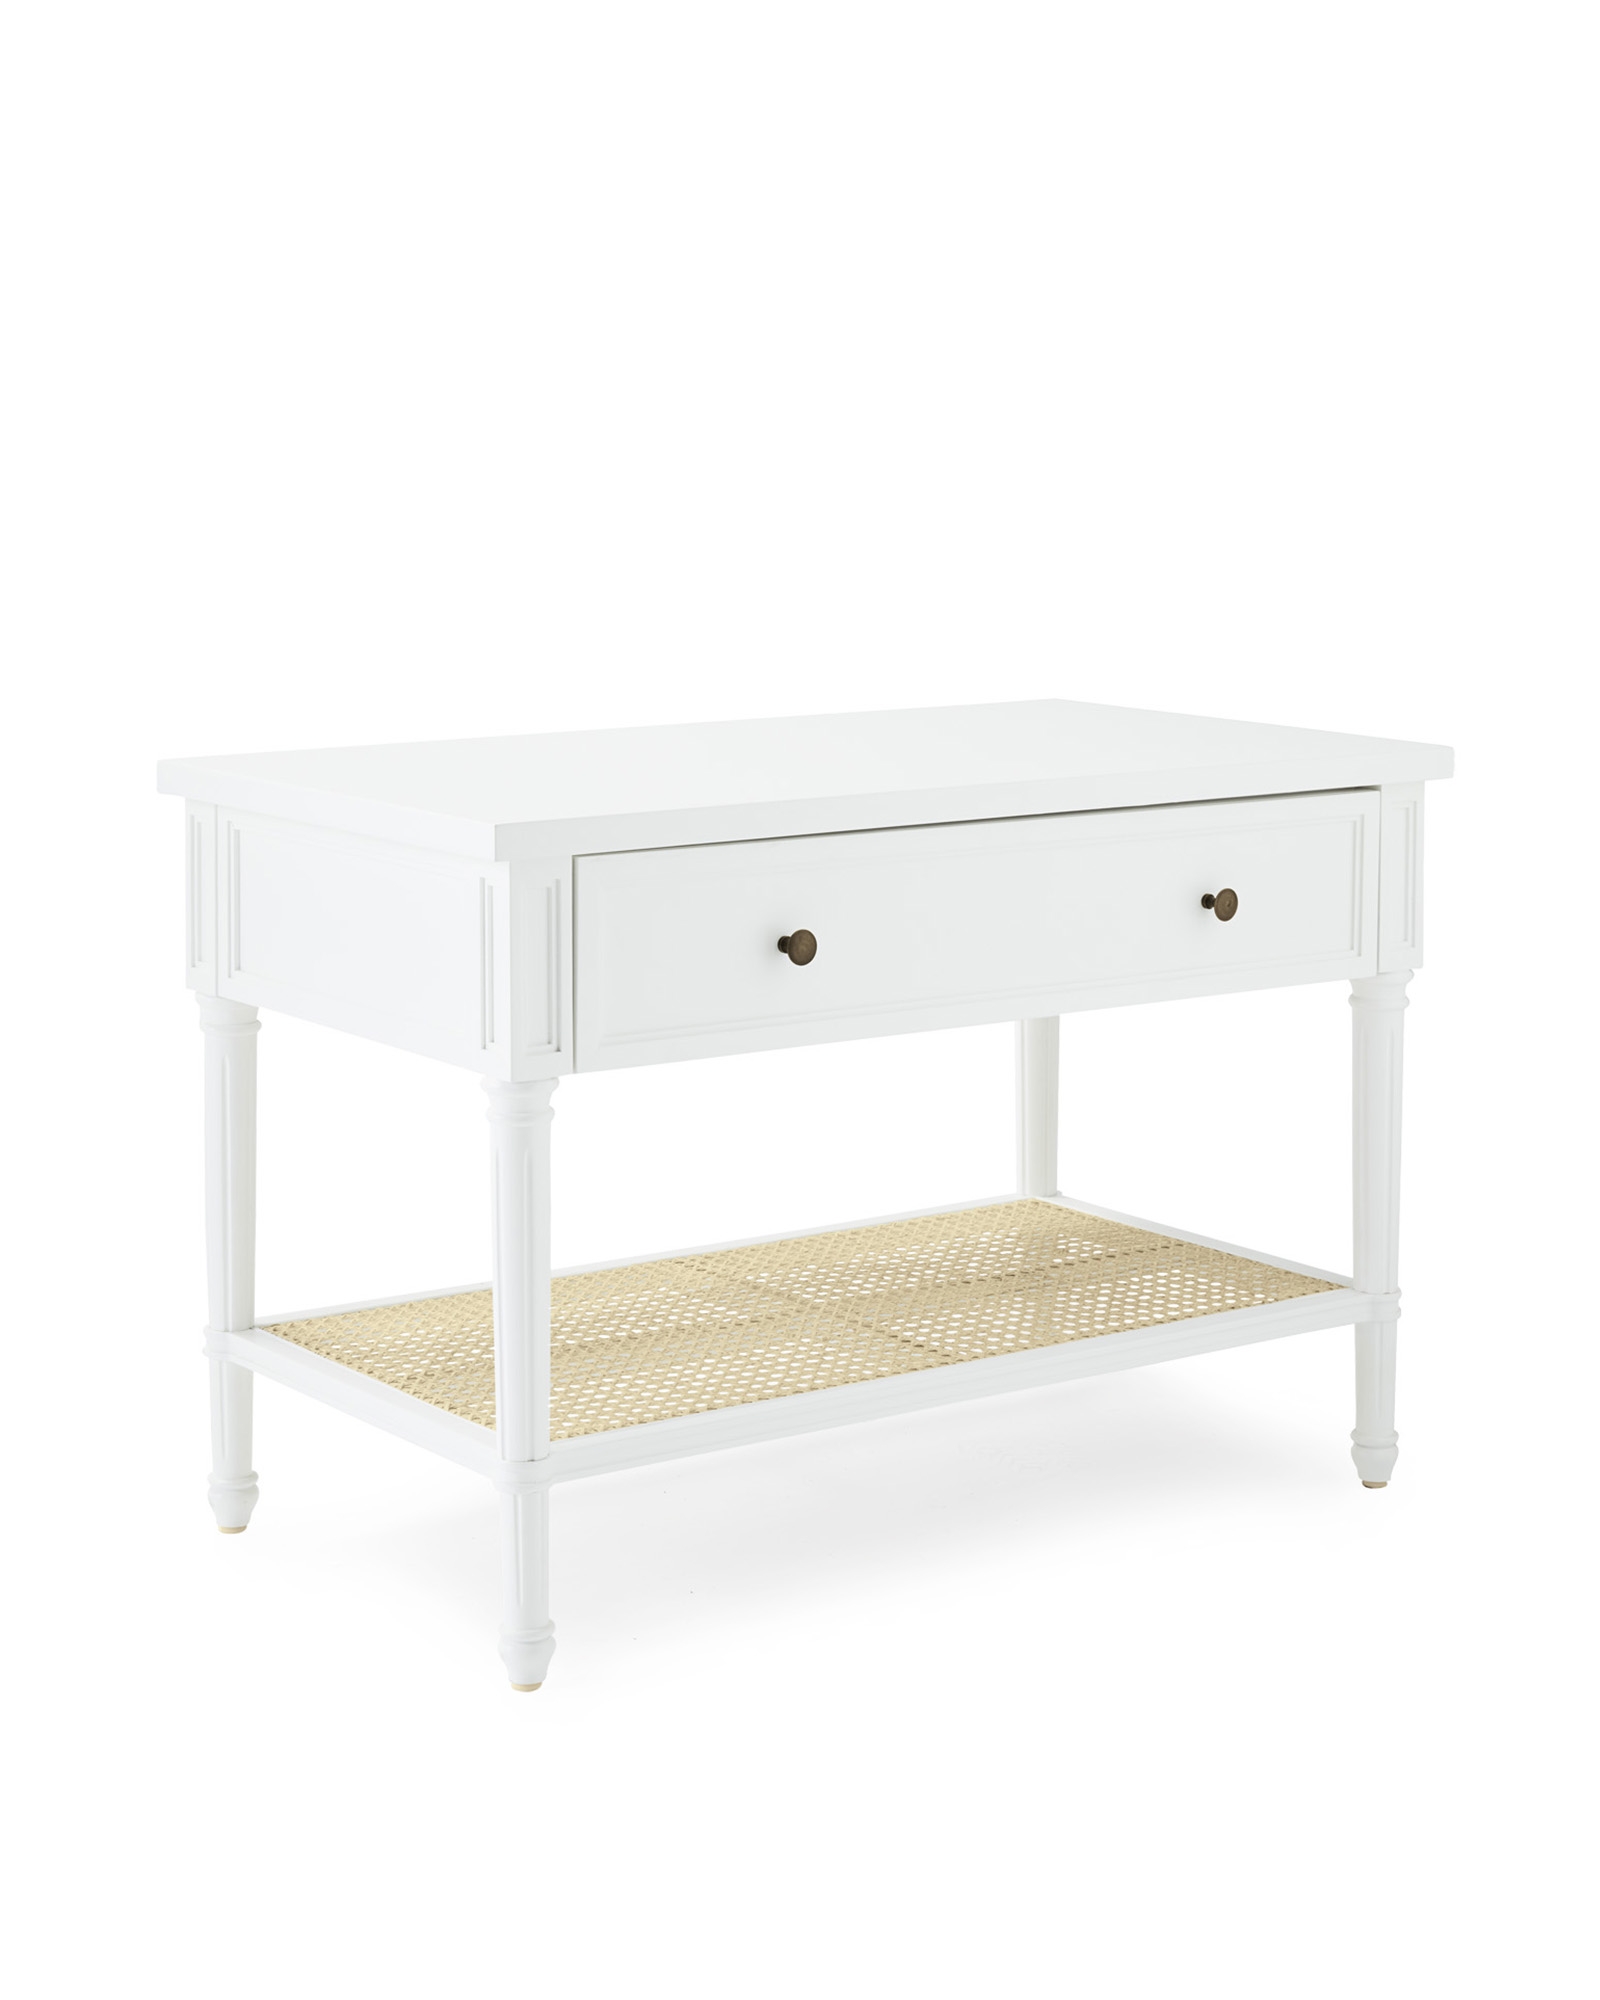 Harbour Cane Nightstand - White - Image 2